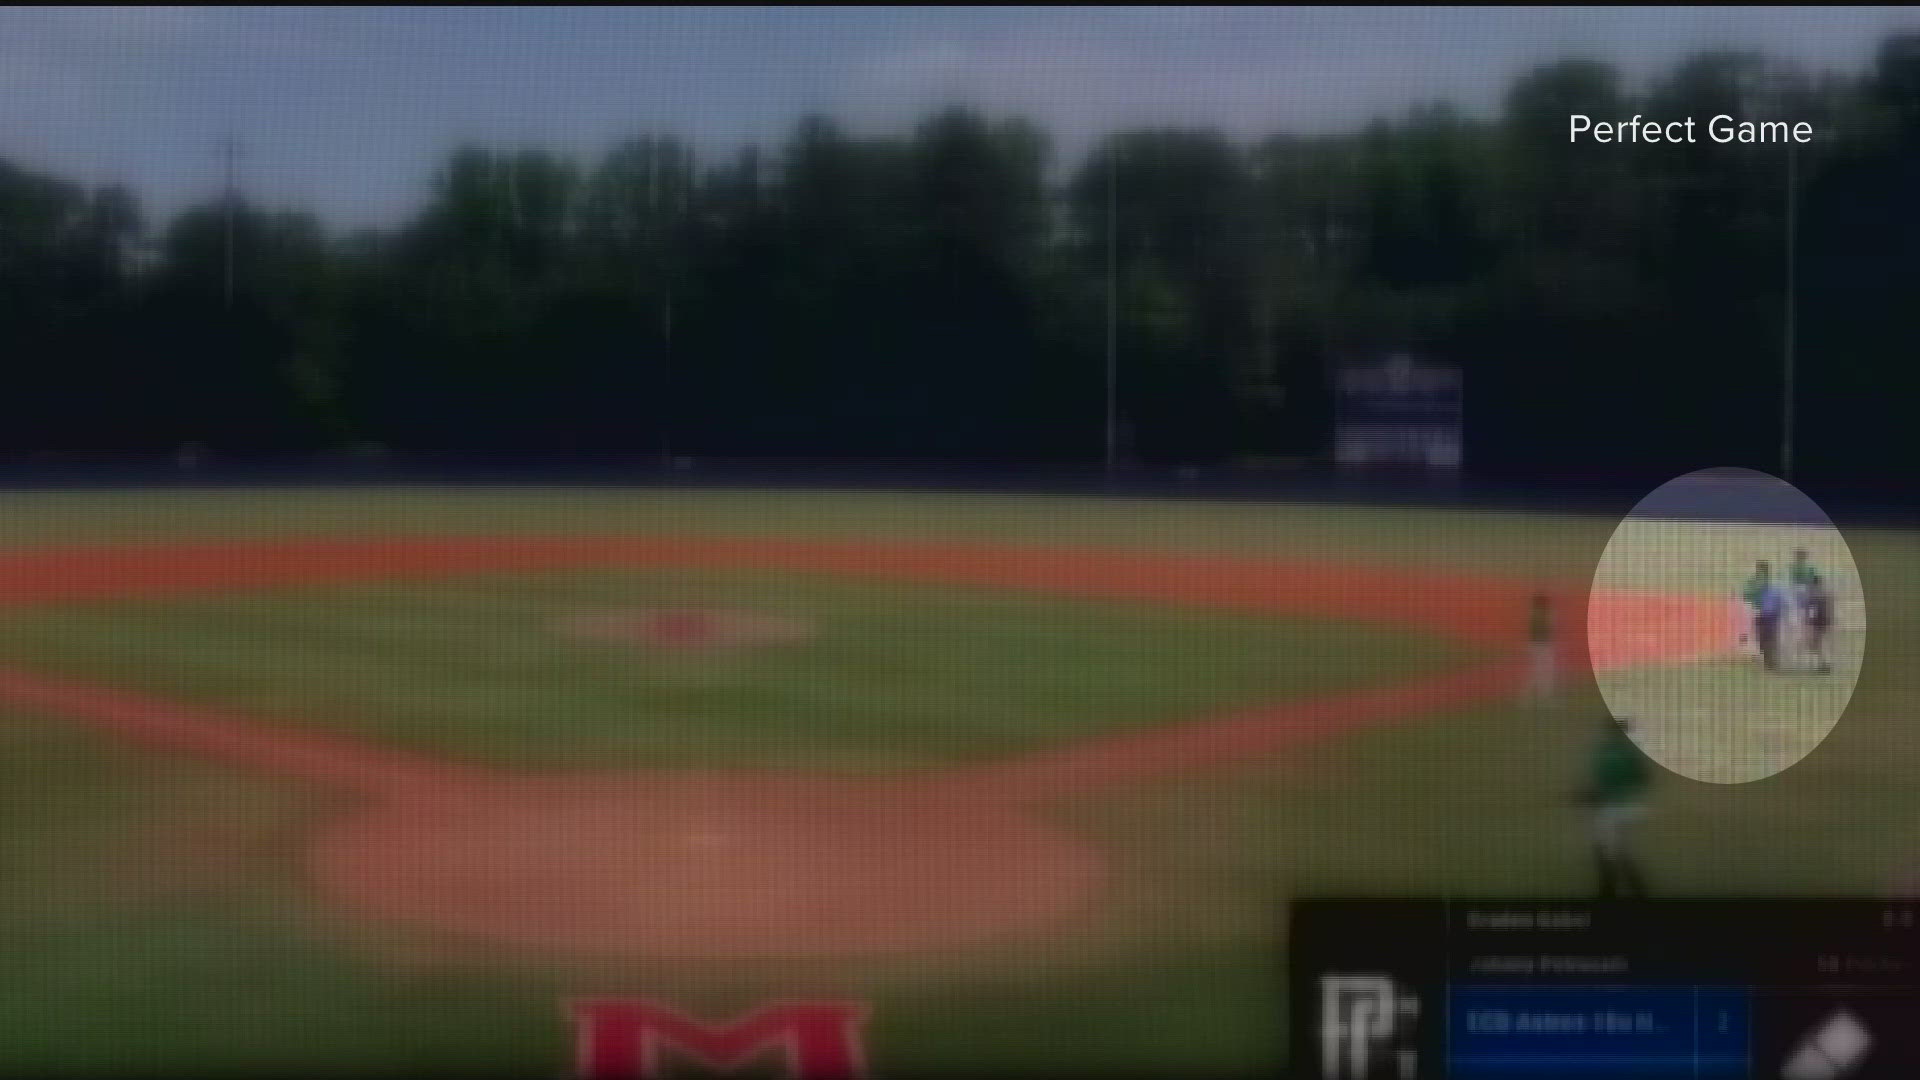 The incident happened in a Perfect Game tournament game at Milton High School between the 18-year-old teams of the East Cobb Astros and the Reign on June 16.